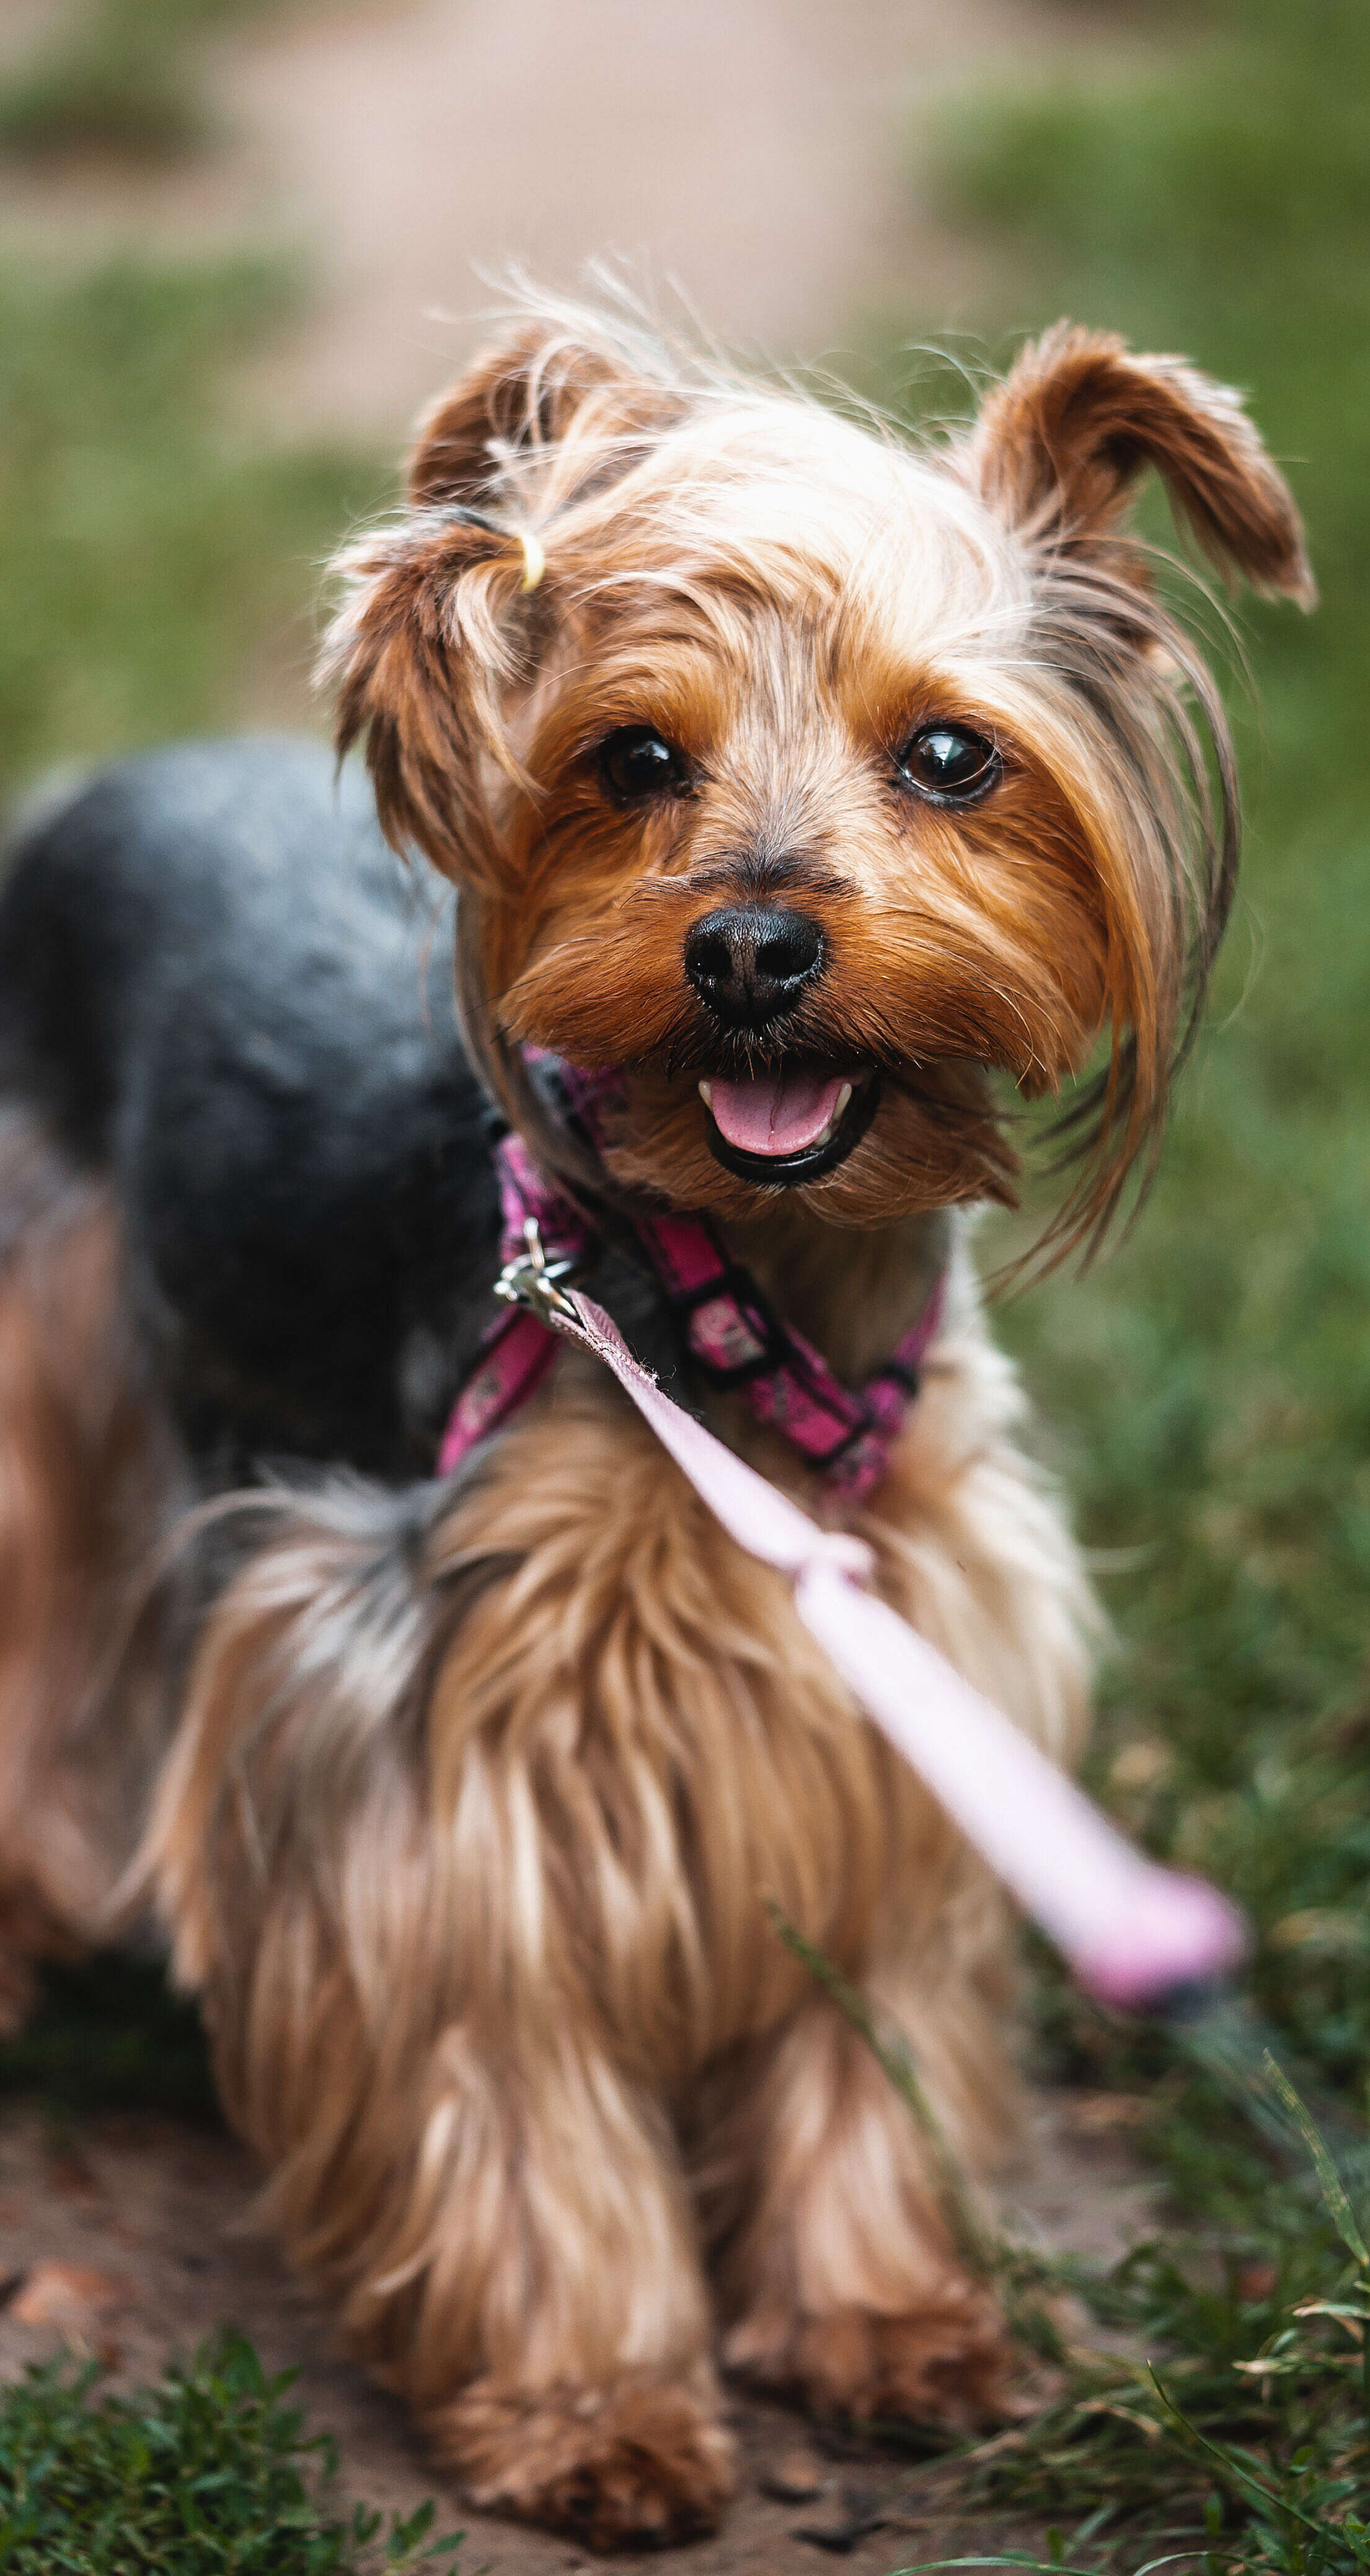 Our Yorkshire Terrier Jessie on a Leash Free Stock Photo